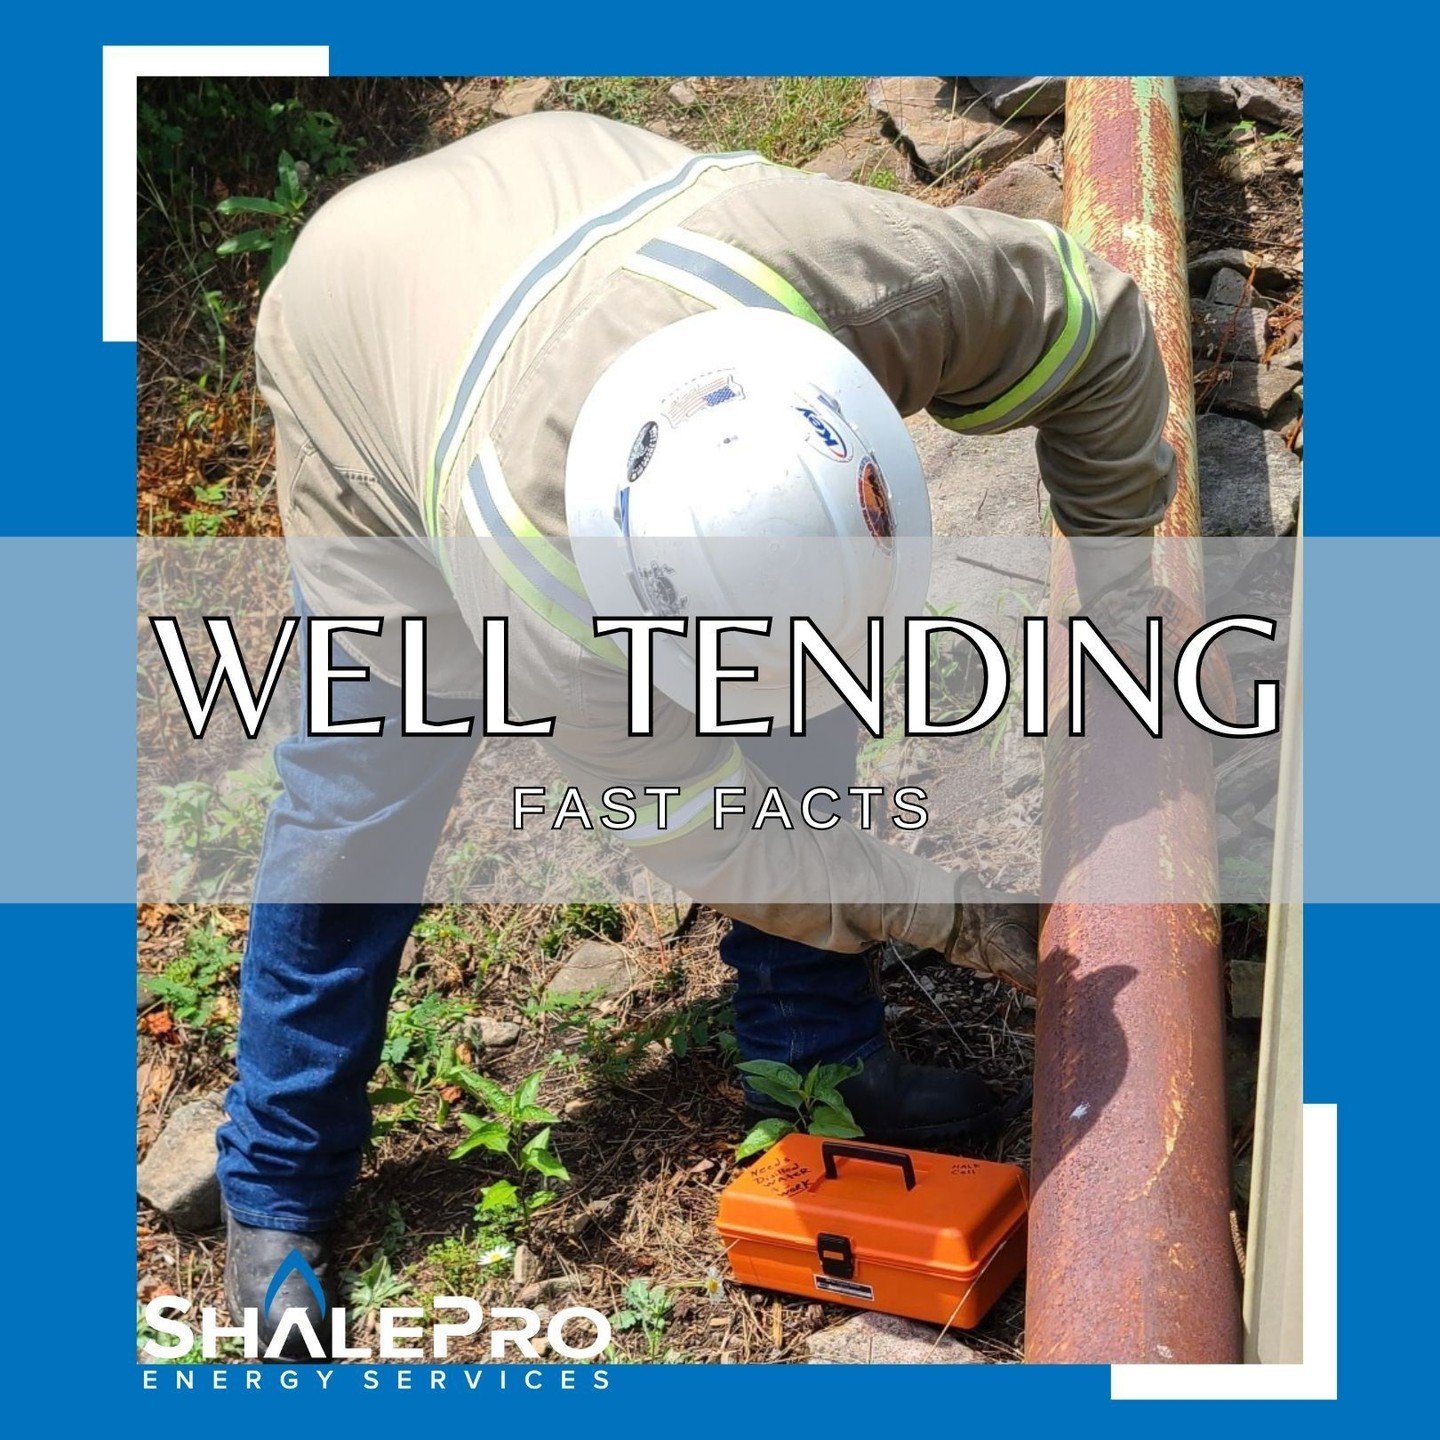 It's #FastFactFriday at ShalePro!

Our well tenders currently operate more than 2,000 wells and associated facilities across the region!
#GoWithThePro